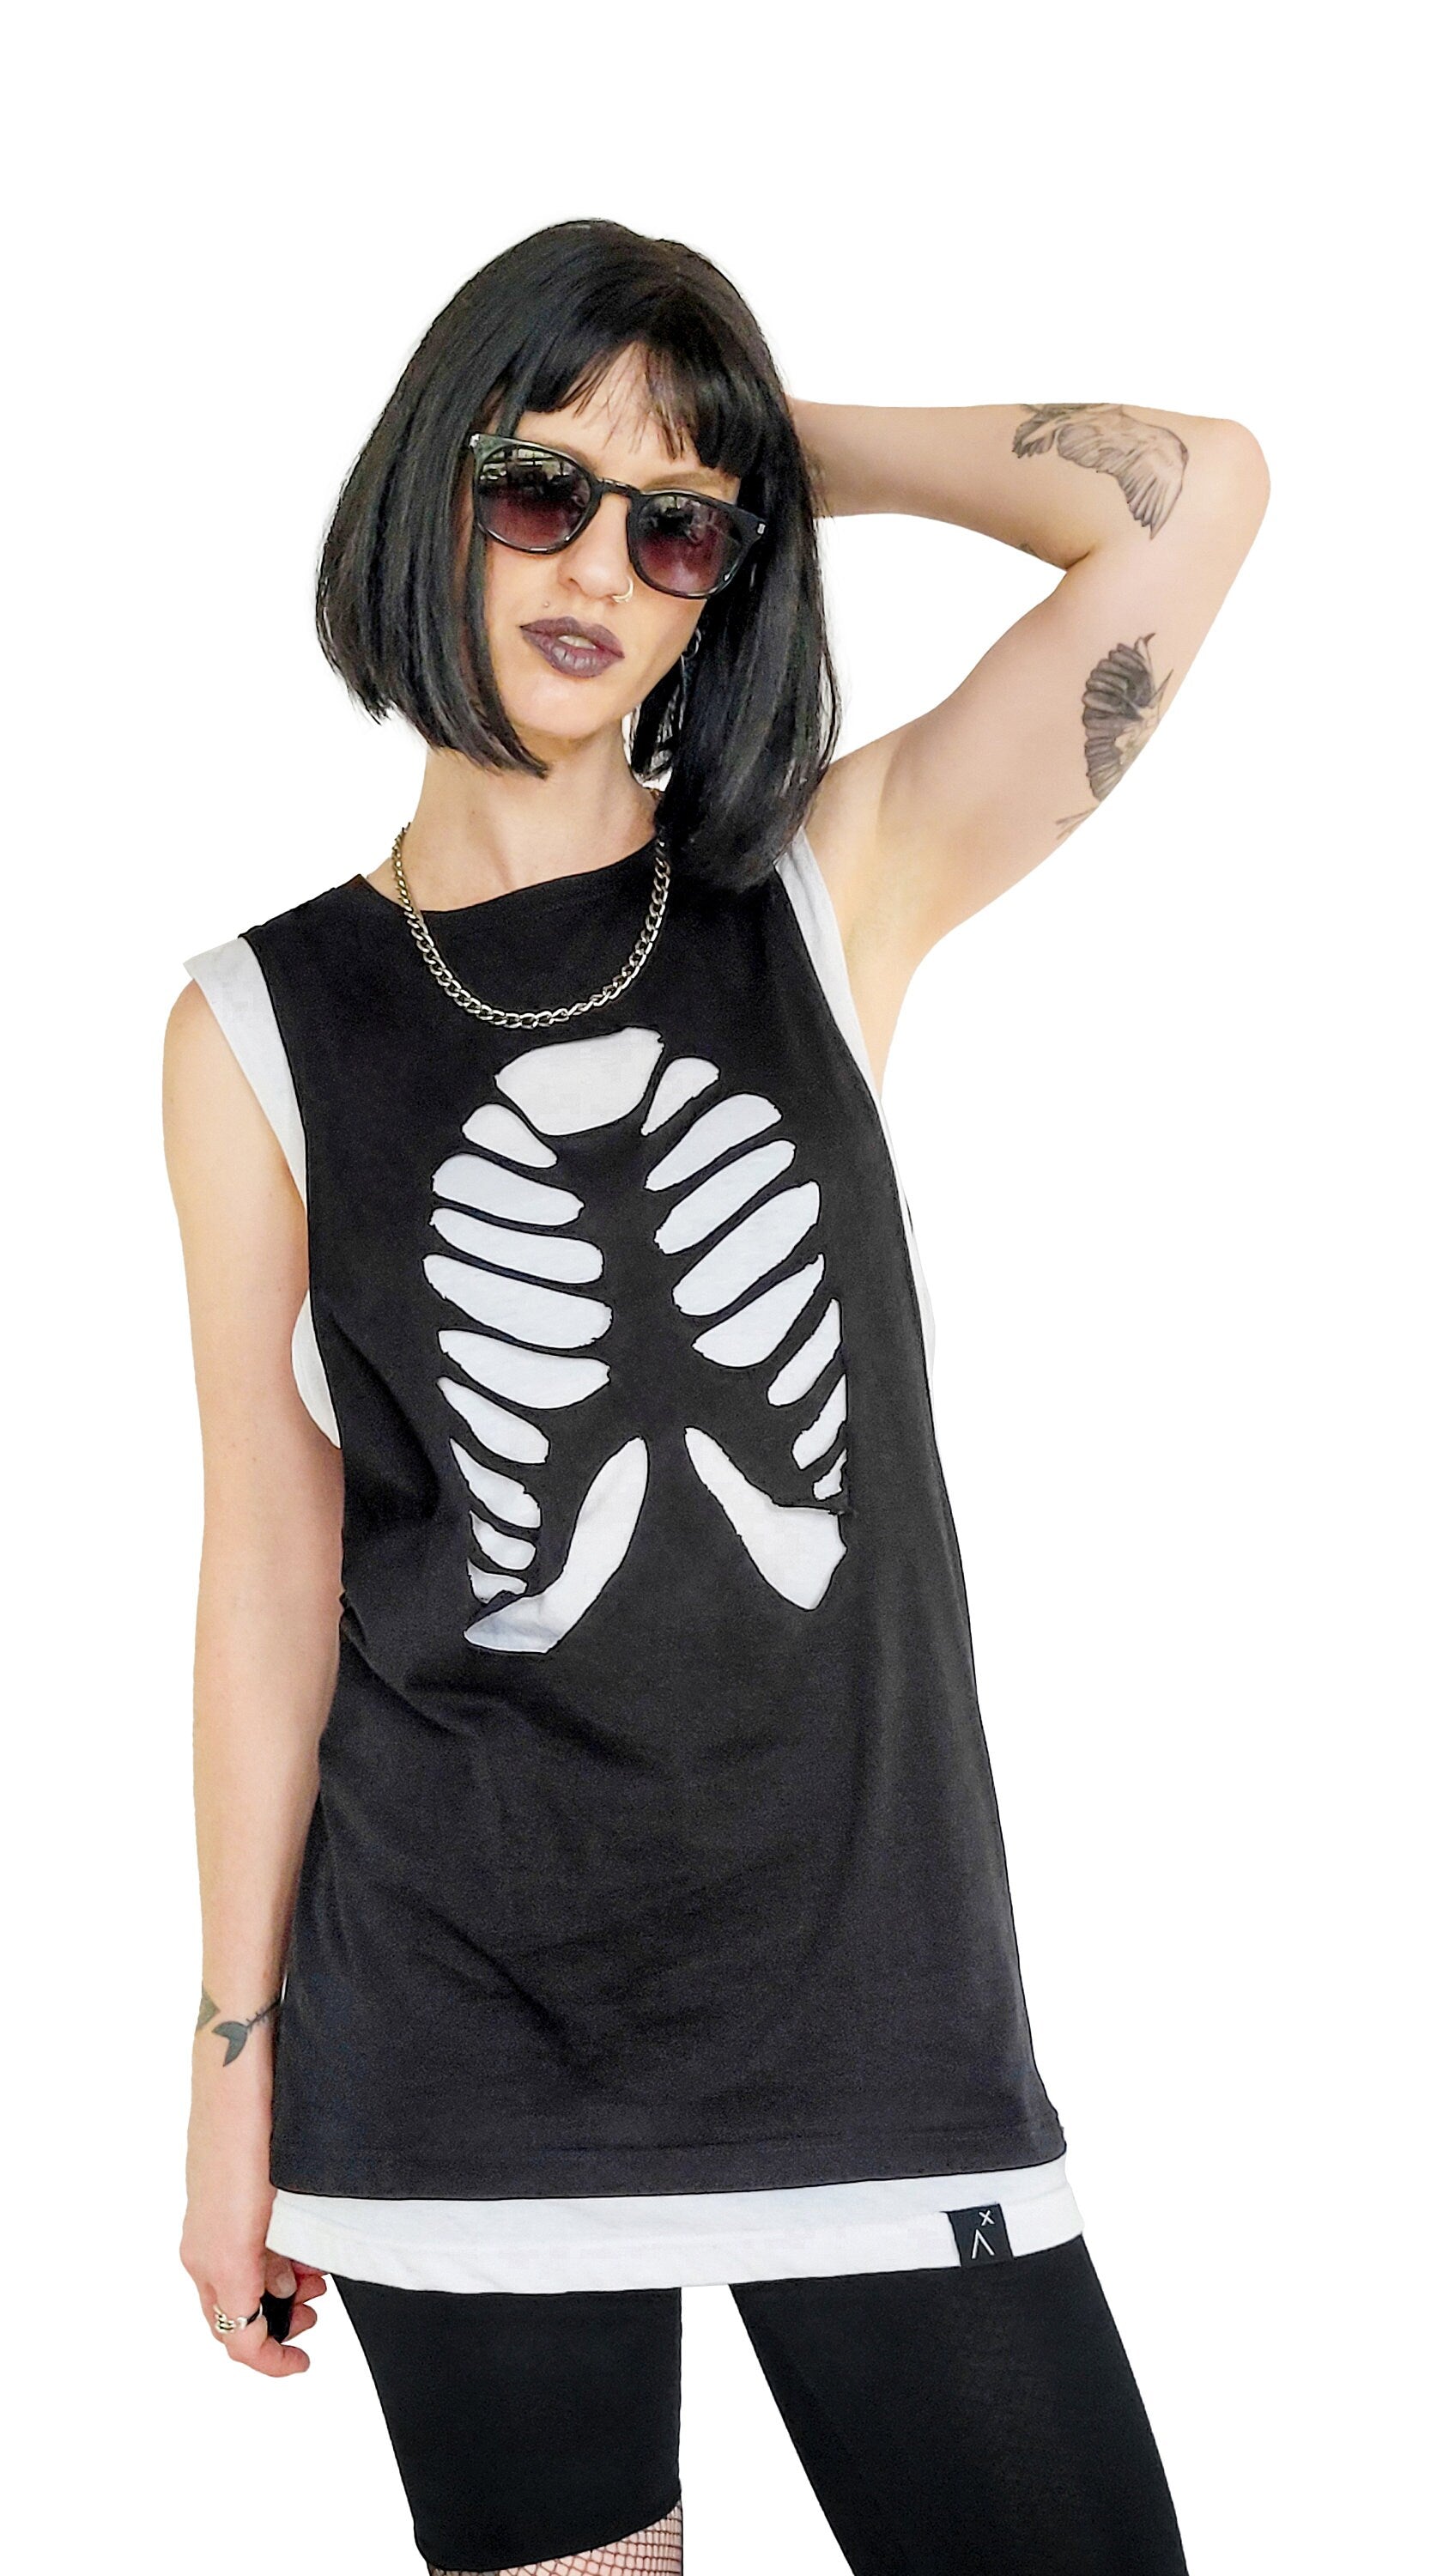 Handmade skeleton tank top cut out top ribcage skeleton T shirt | cut out tank top cut out shirt Unisex goth top gothic top Halloween shirt